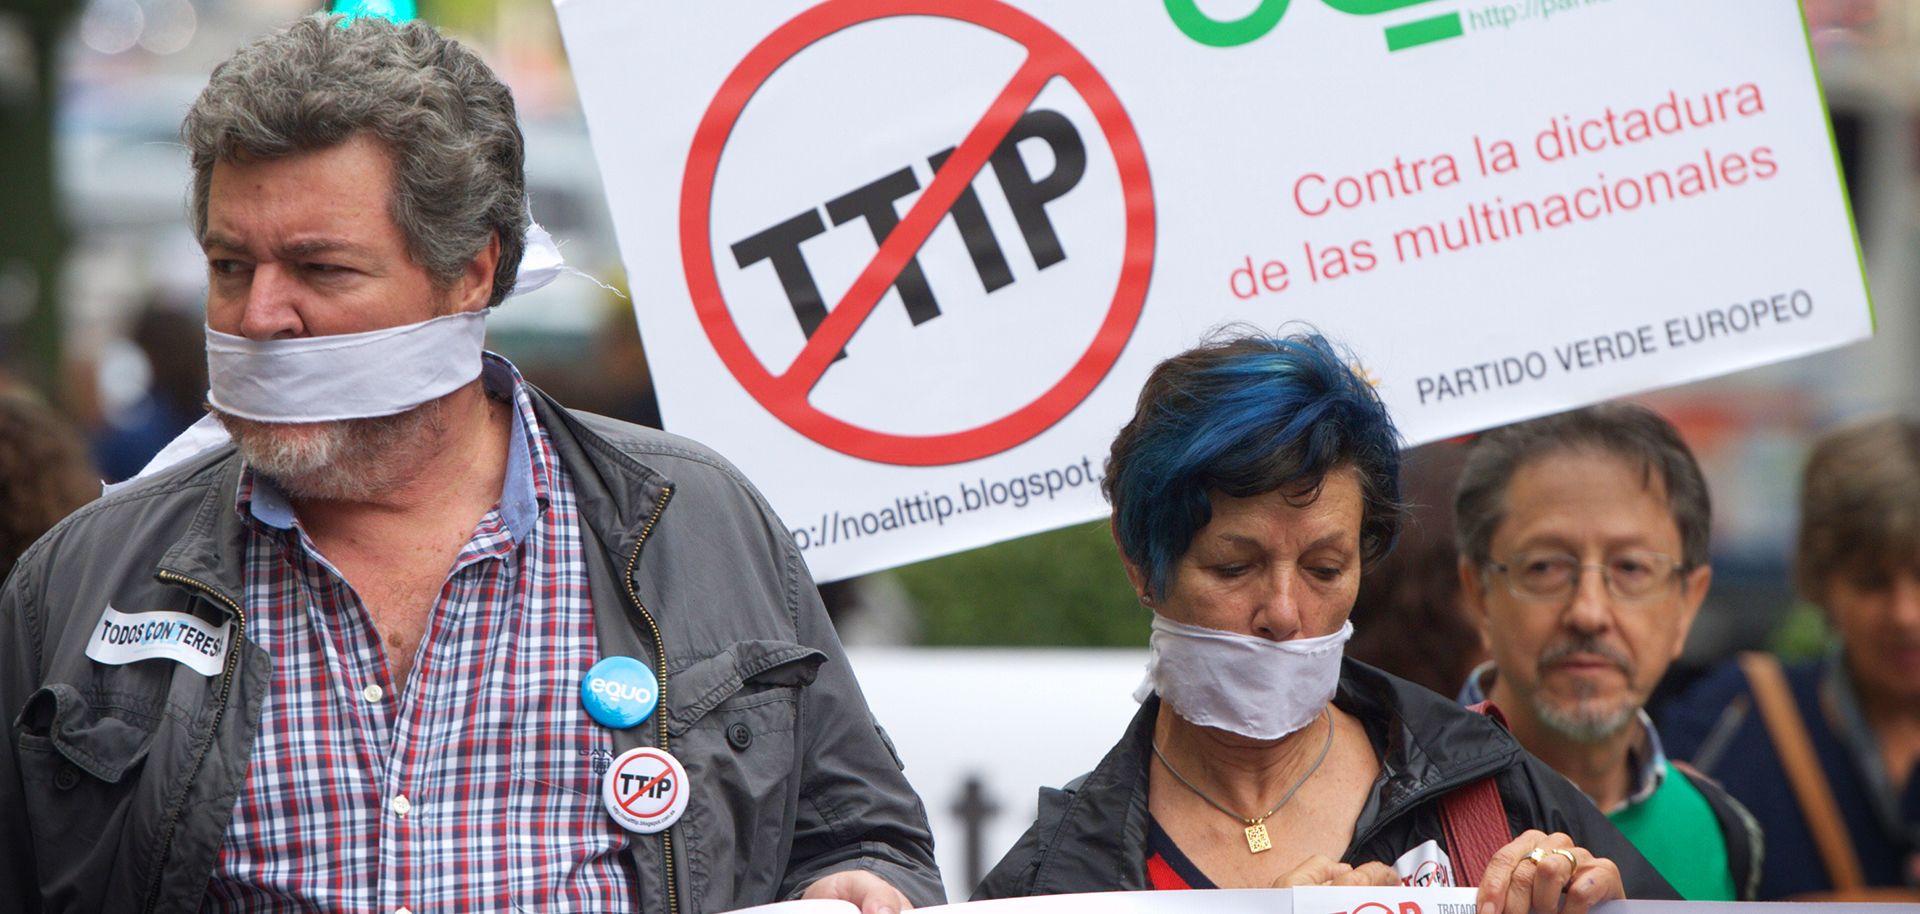 Protesters take part in a demonstration against the Trans-Atlantic Trade and Investment Partnership in Madrid on Oct. 11. 